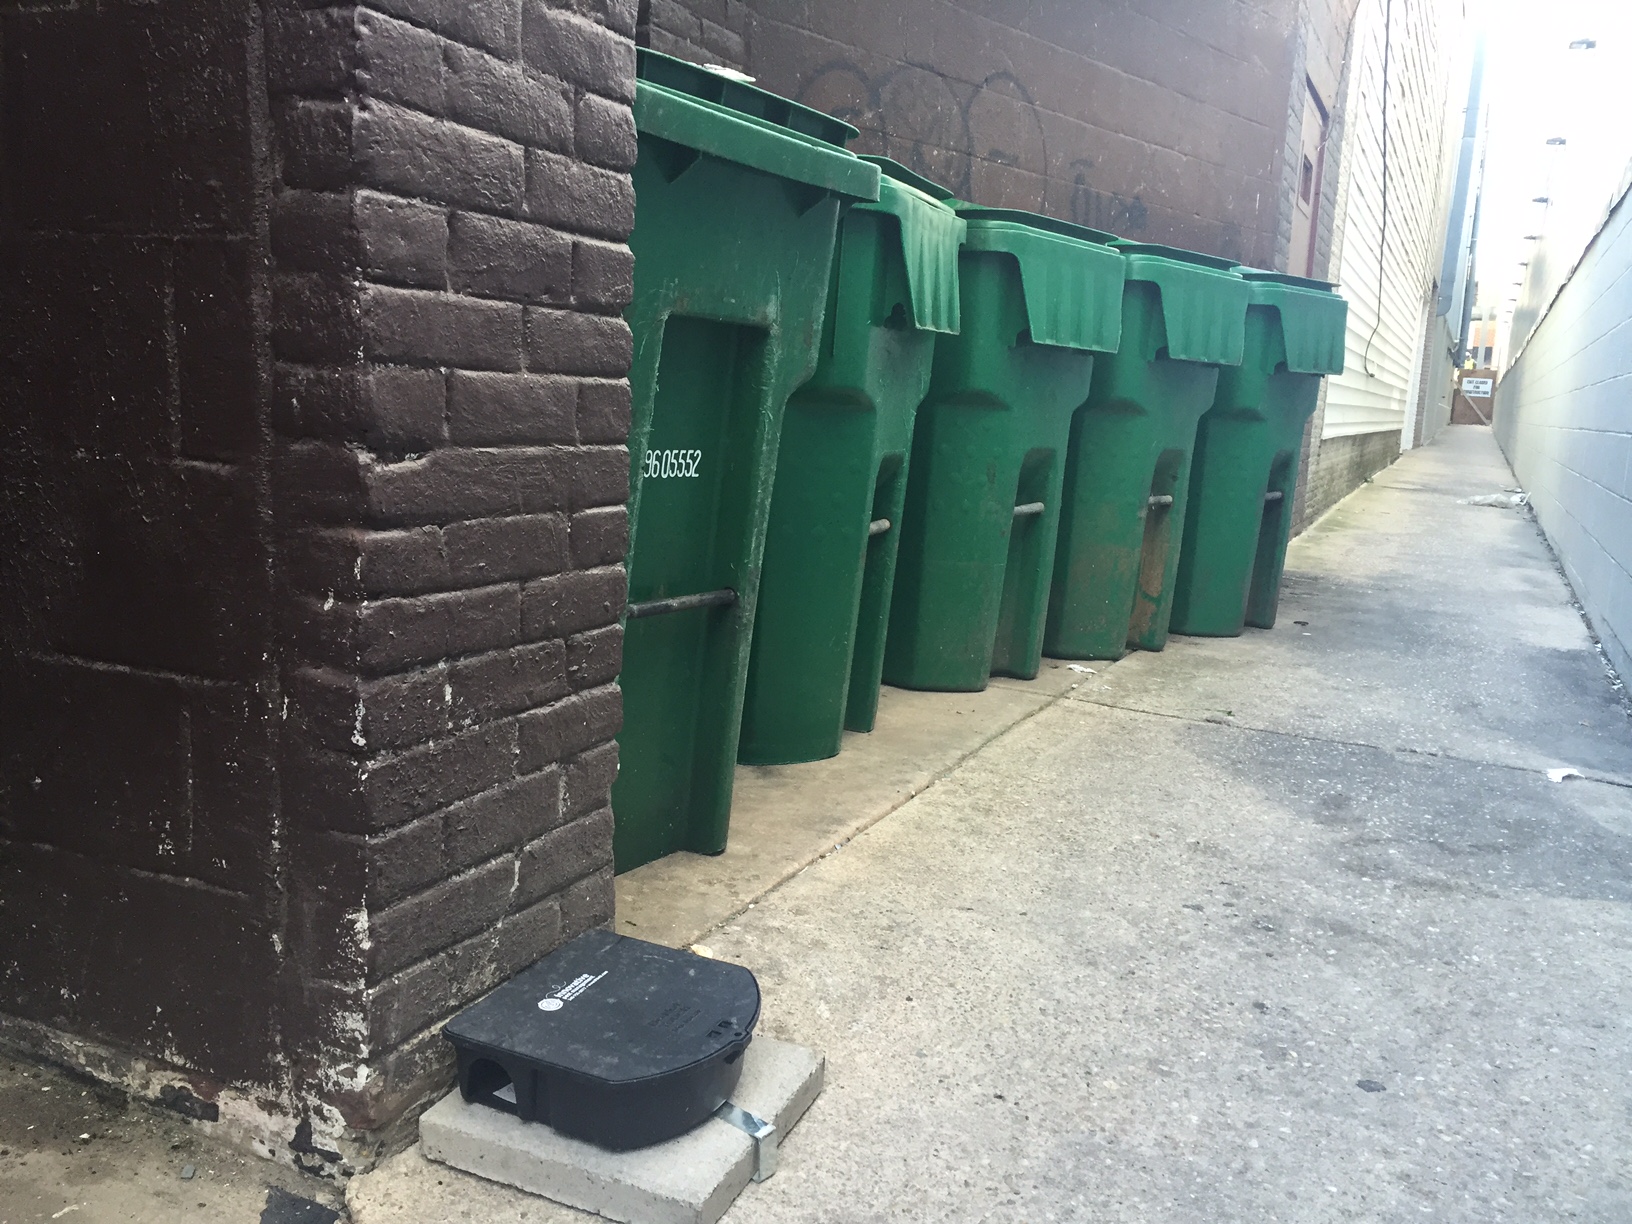 One owner says the rat issue has improved significantly in the past couple of weeks, thanks to efforts that include poisoning the rats and using stronger trash cans the rats cannot chew through. (WTOP/John Aaron)